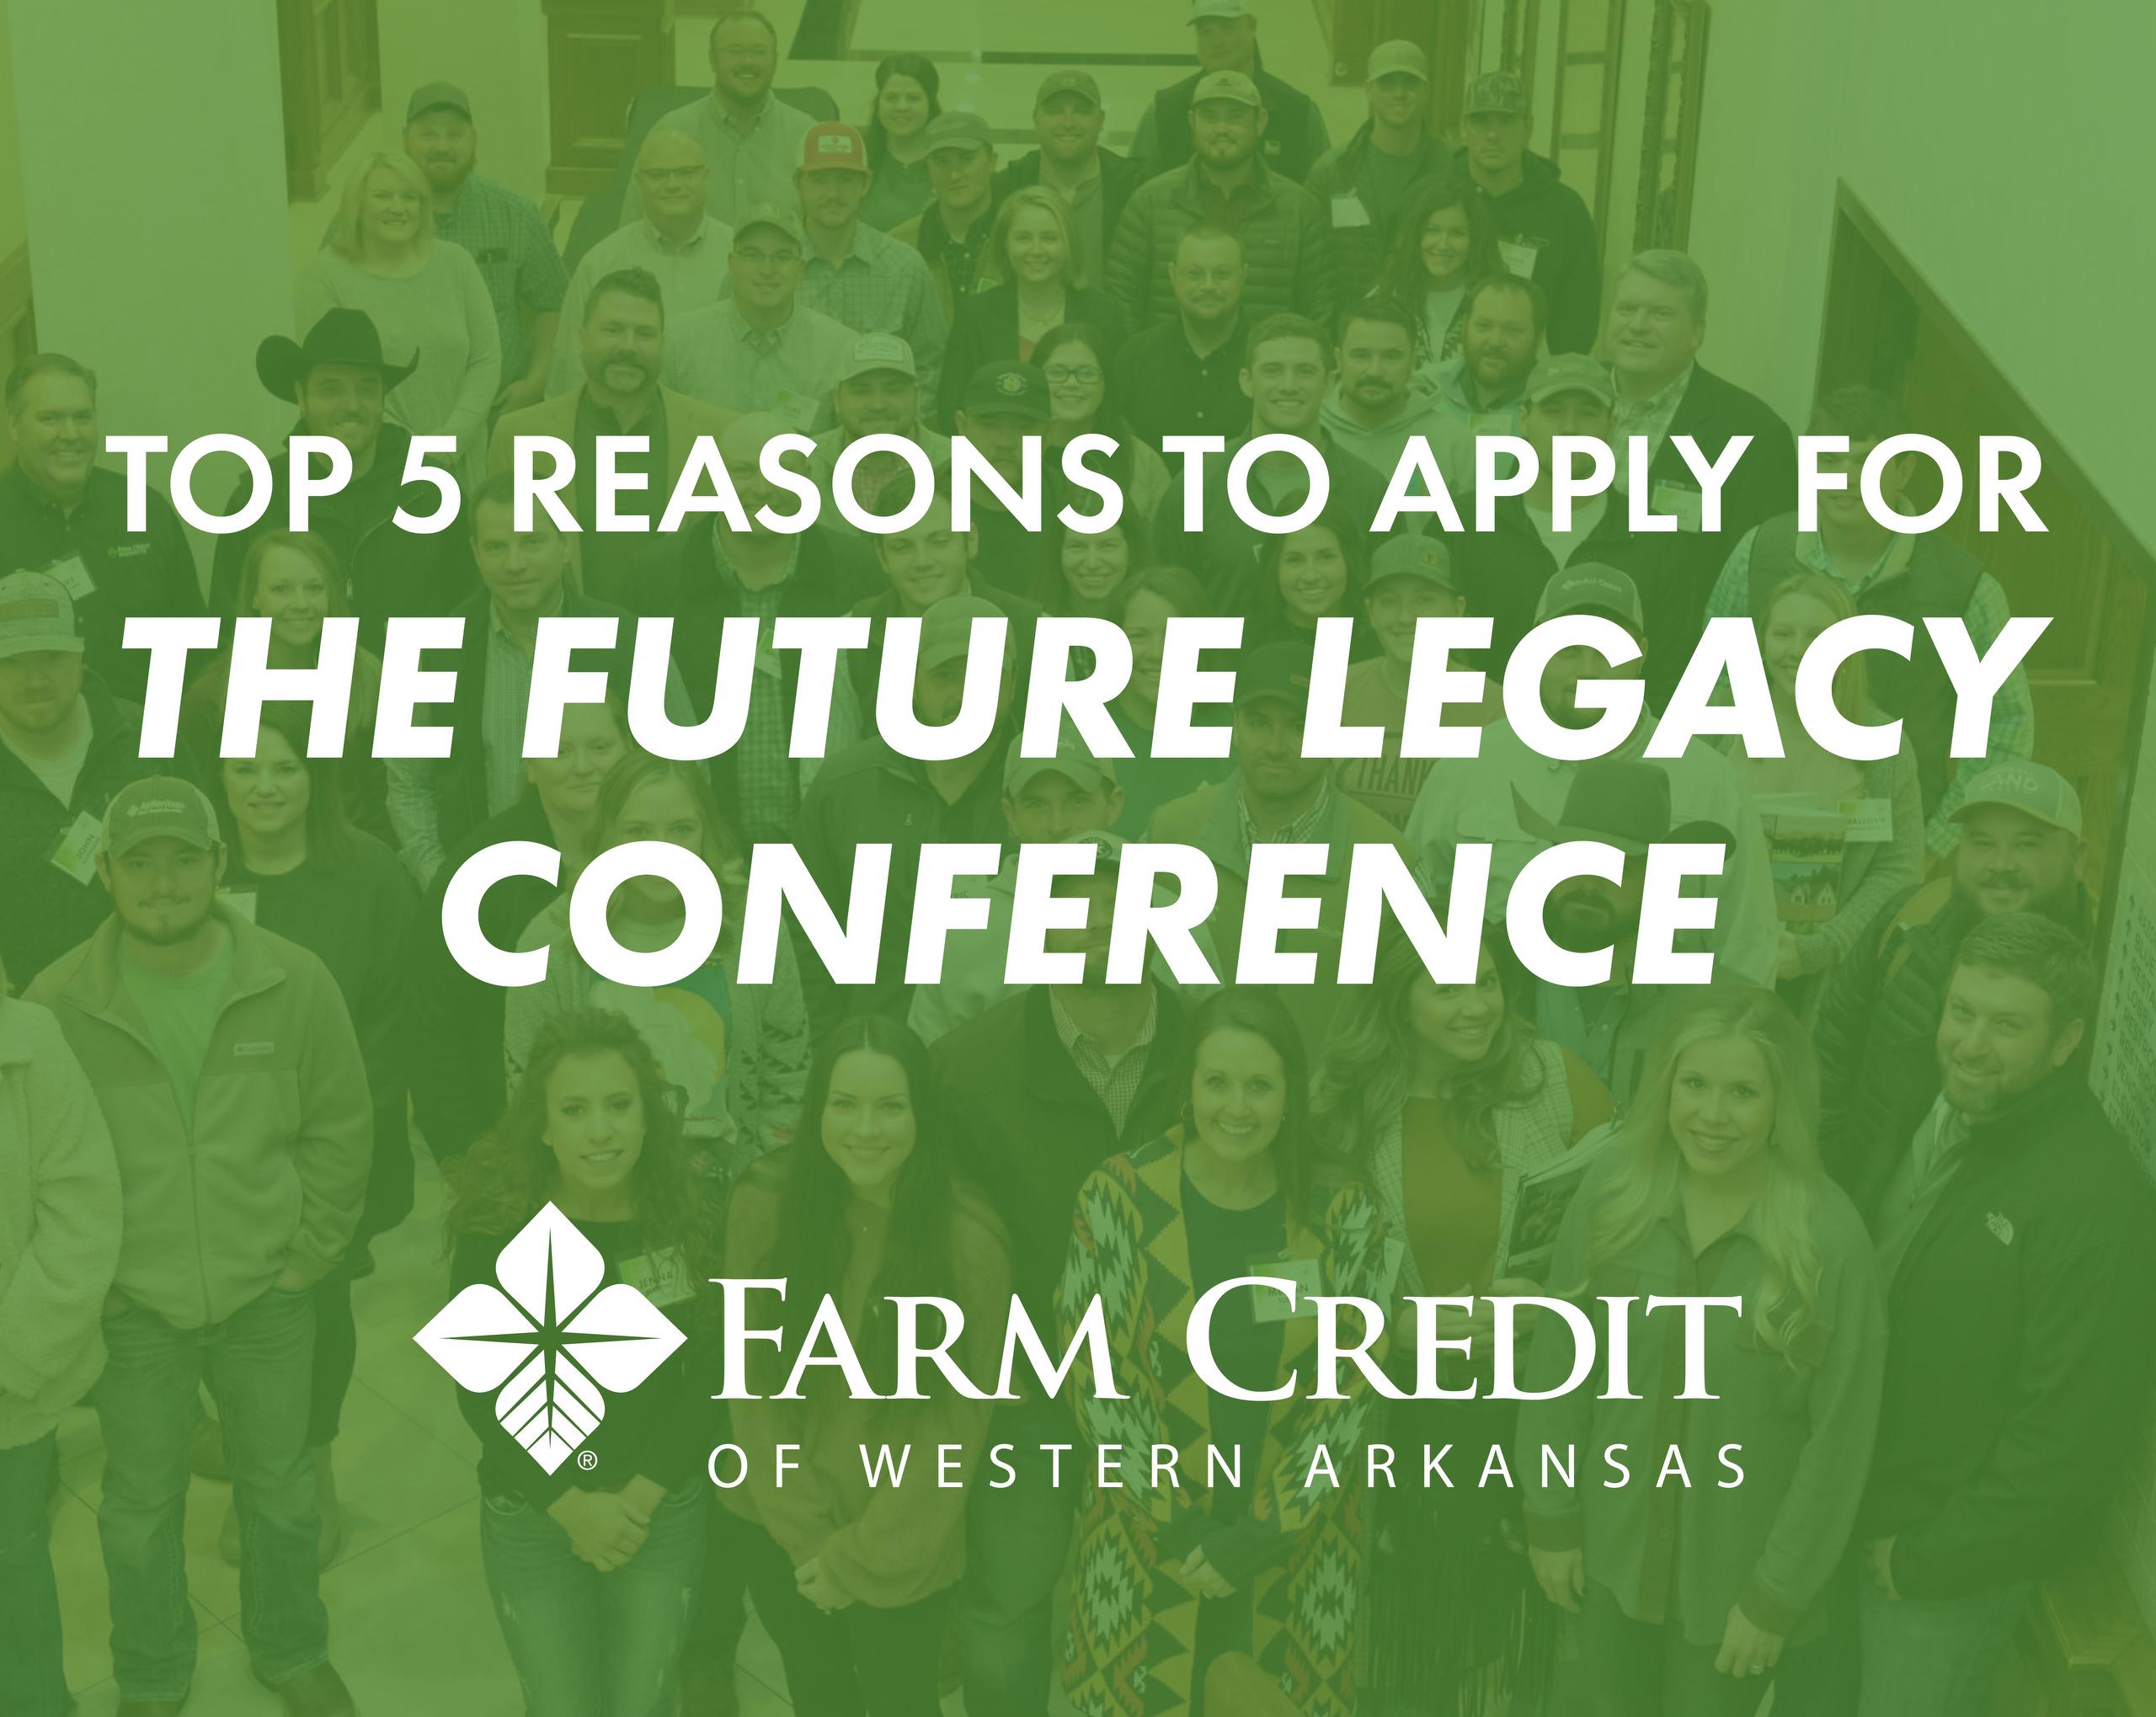 Top 5 Reasons to Apply for the Future Legacy Conference by Farm Credit